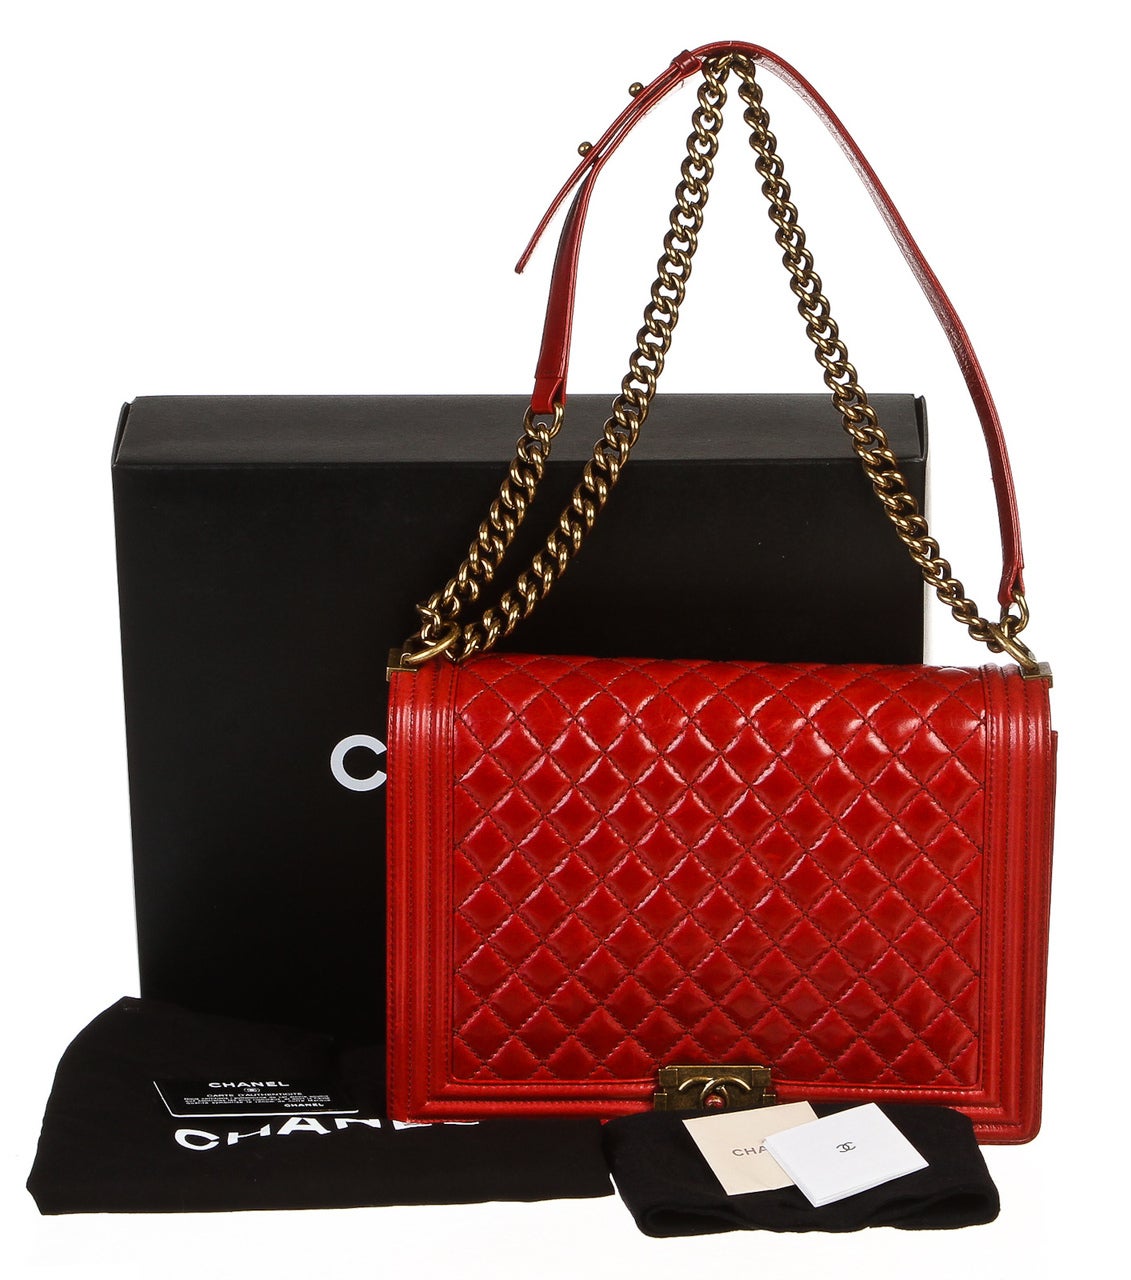 Add a shimmering statement to your style with this vivacious red lambskin Boy Bag from Chanel! This one-of-a-kind flap bag features an quilted stitching that arches from the front to the back as gold-tone hardware moves throughout the chain handle.